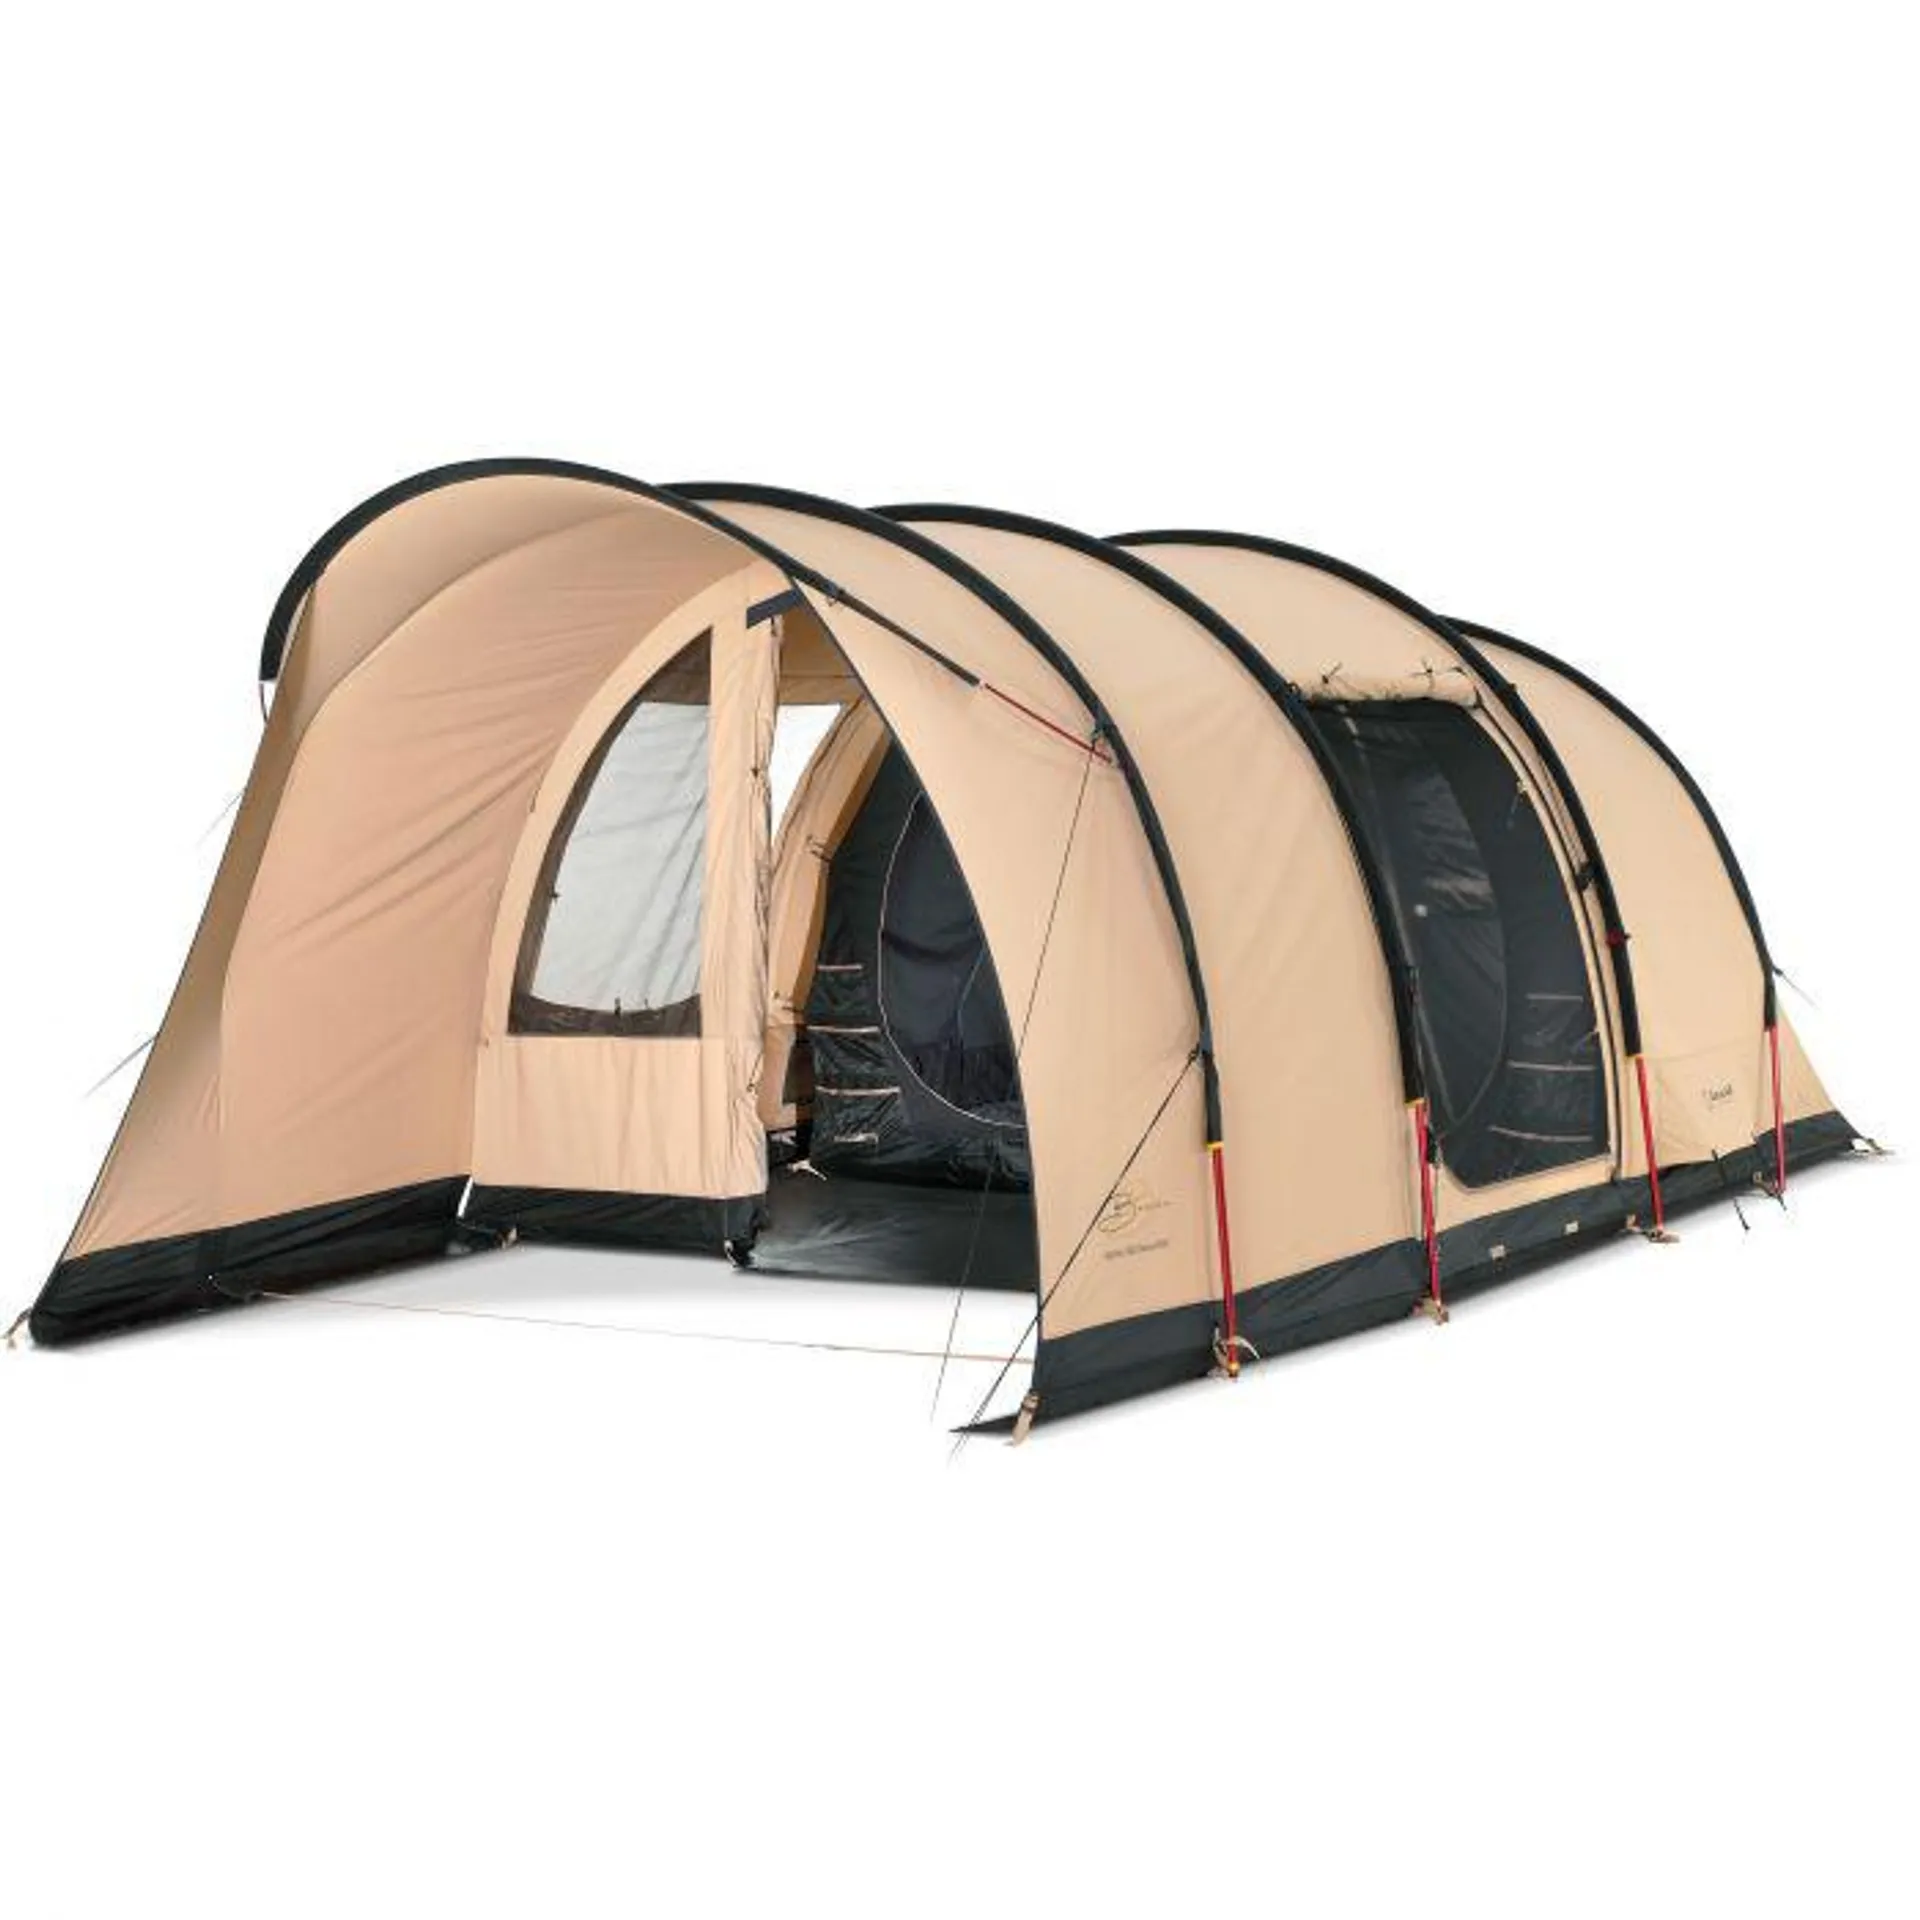 Spitfire 300 Deluxe RSTC tunneltent